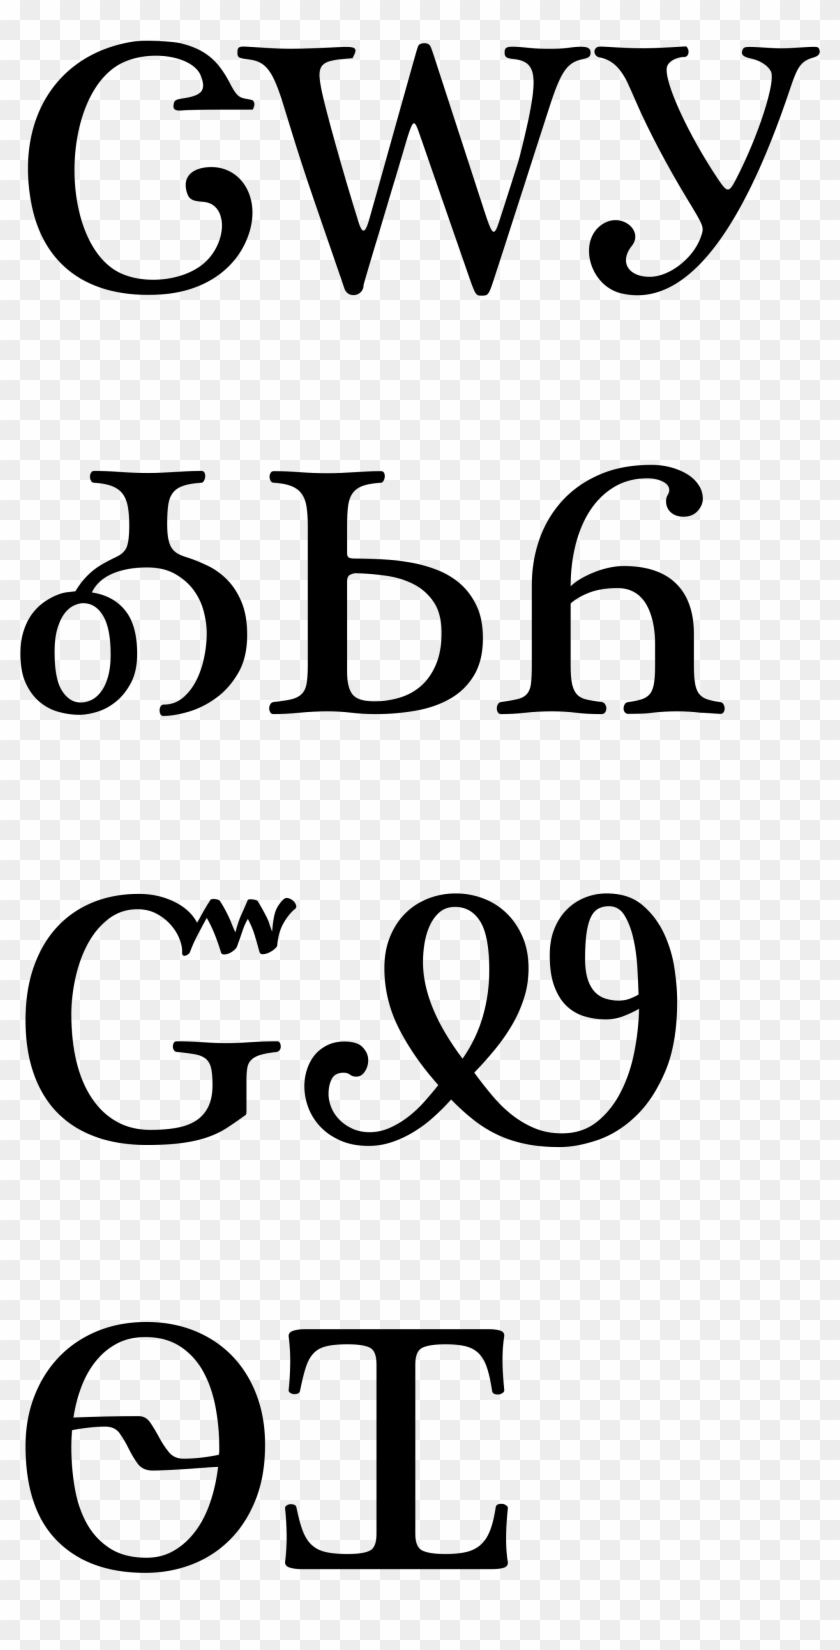 Open - Cherokee Syllabary For Gwy #1404258